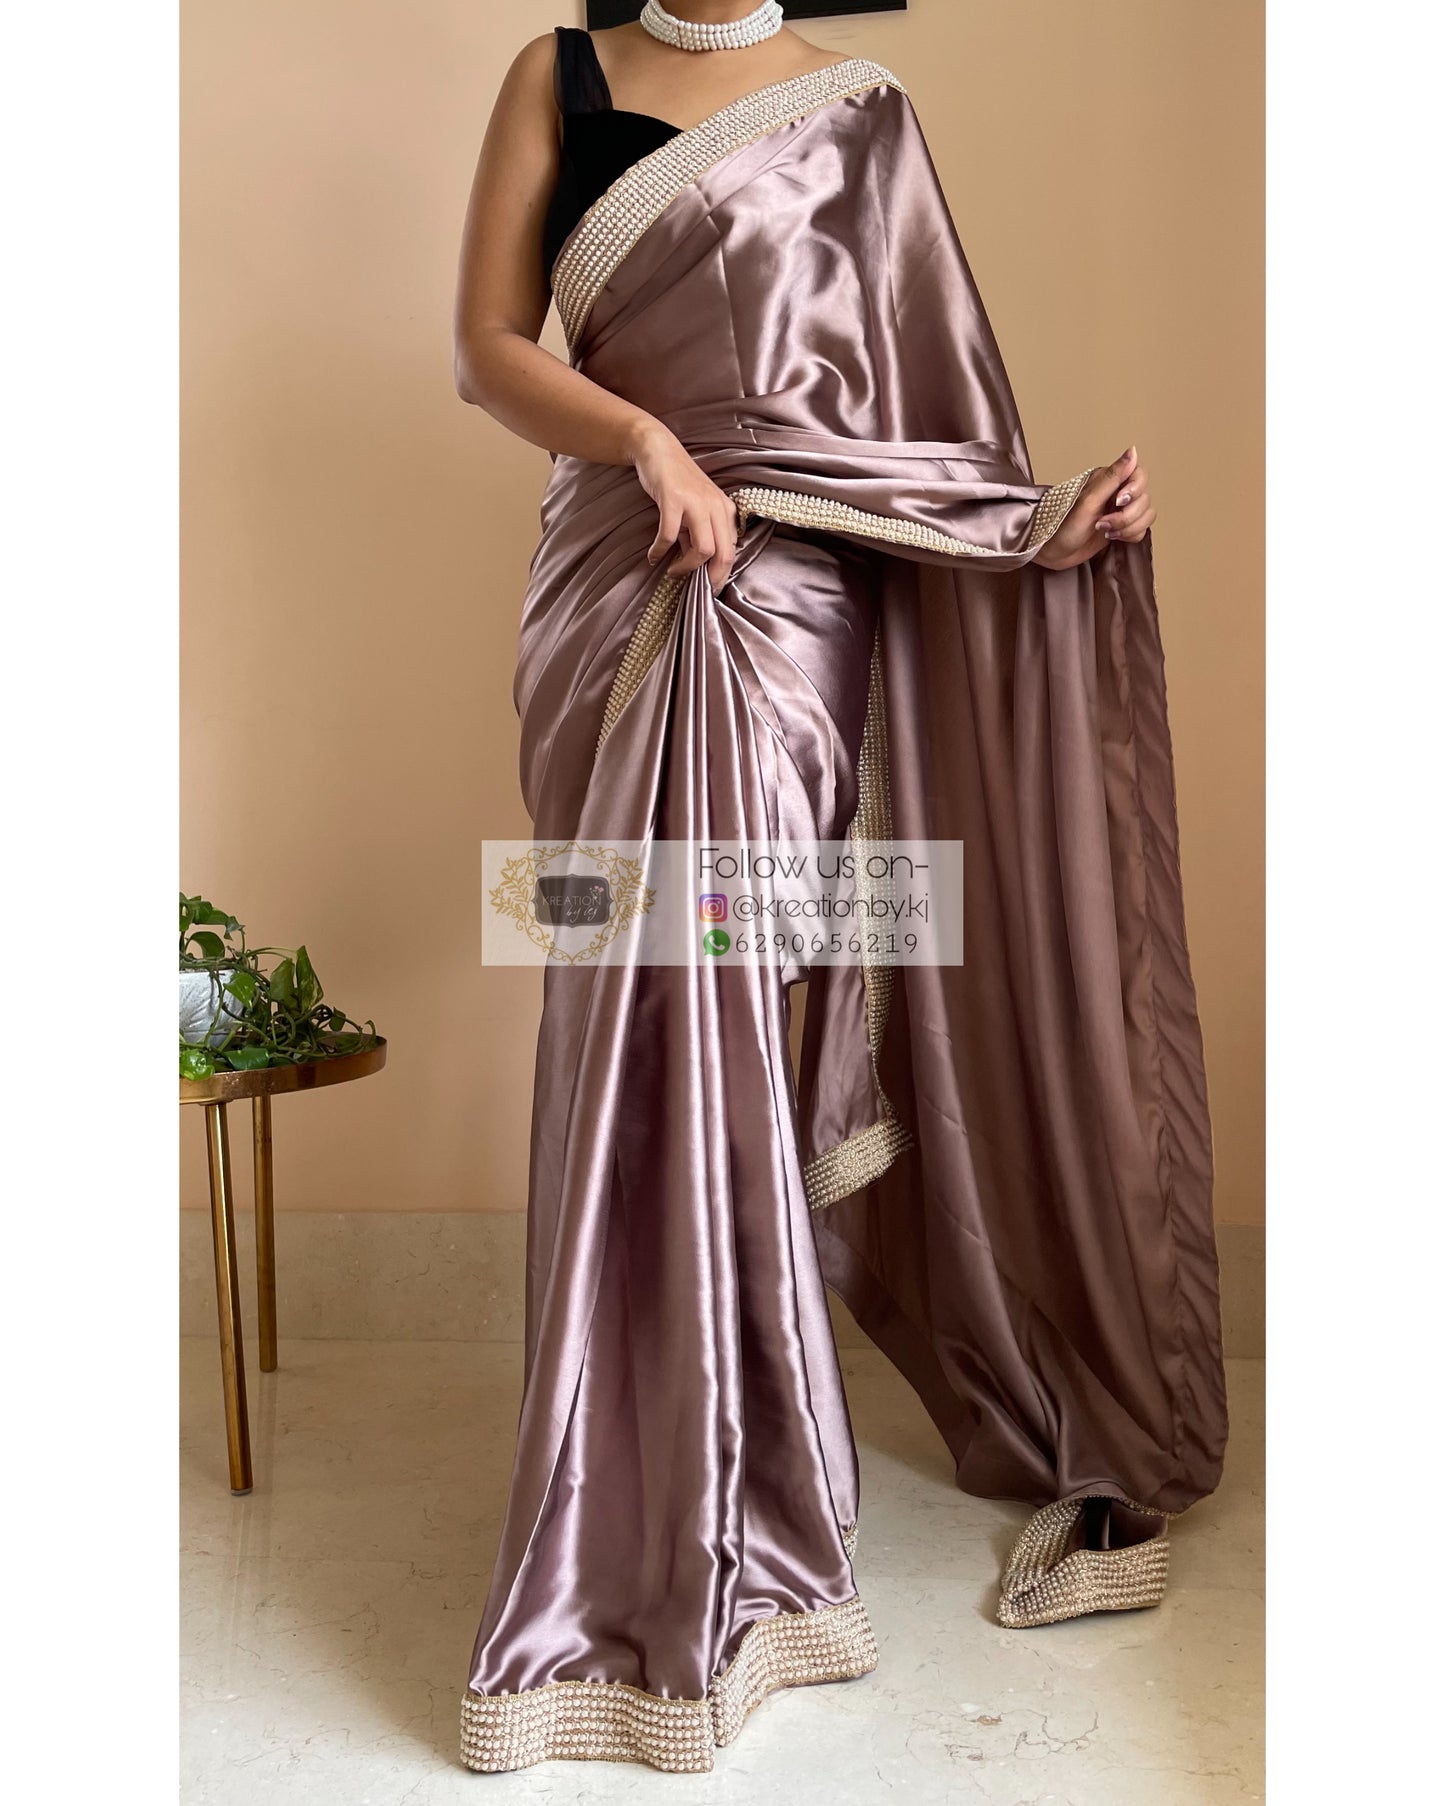 Dusty Mauve Mother Of Pearl Saree - kreationbykj